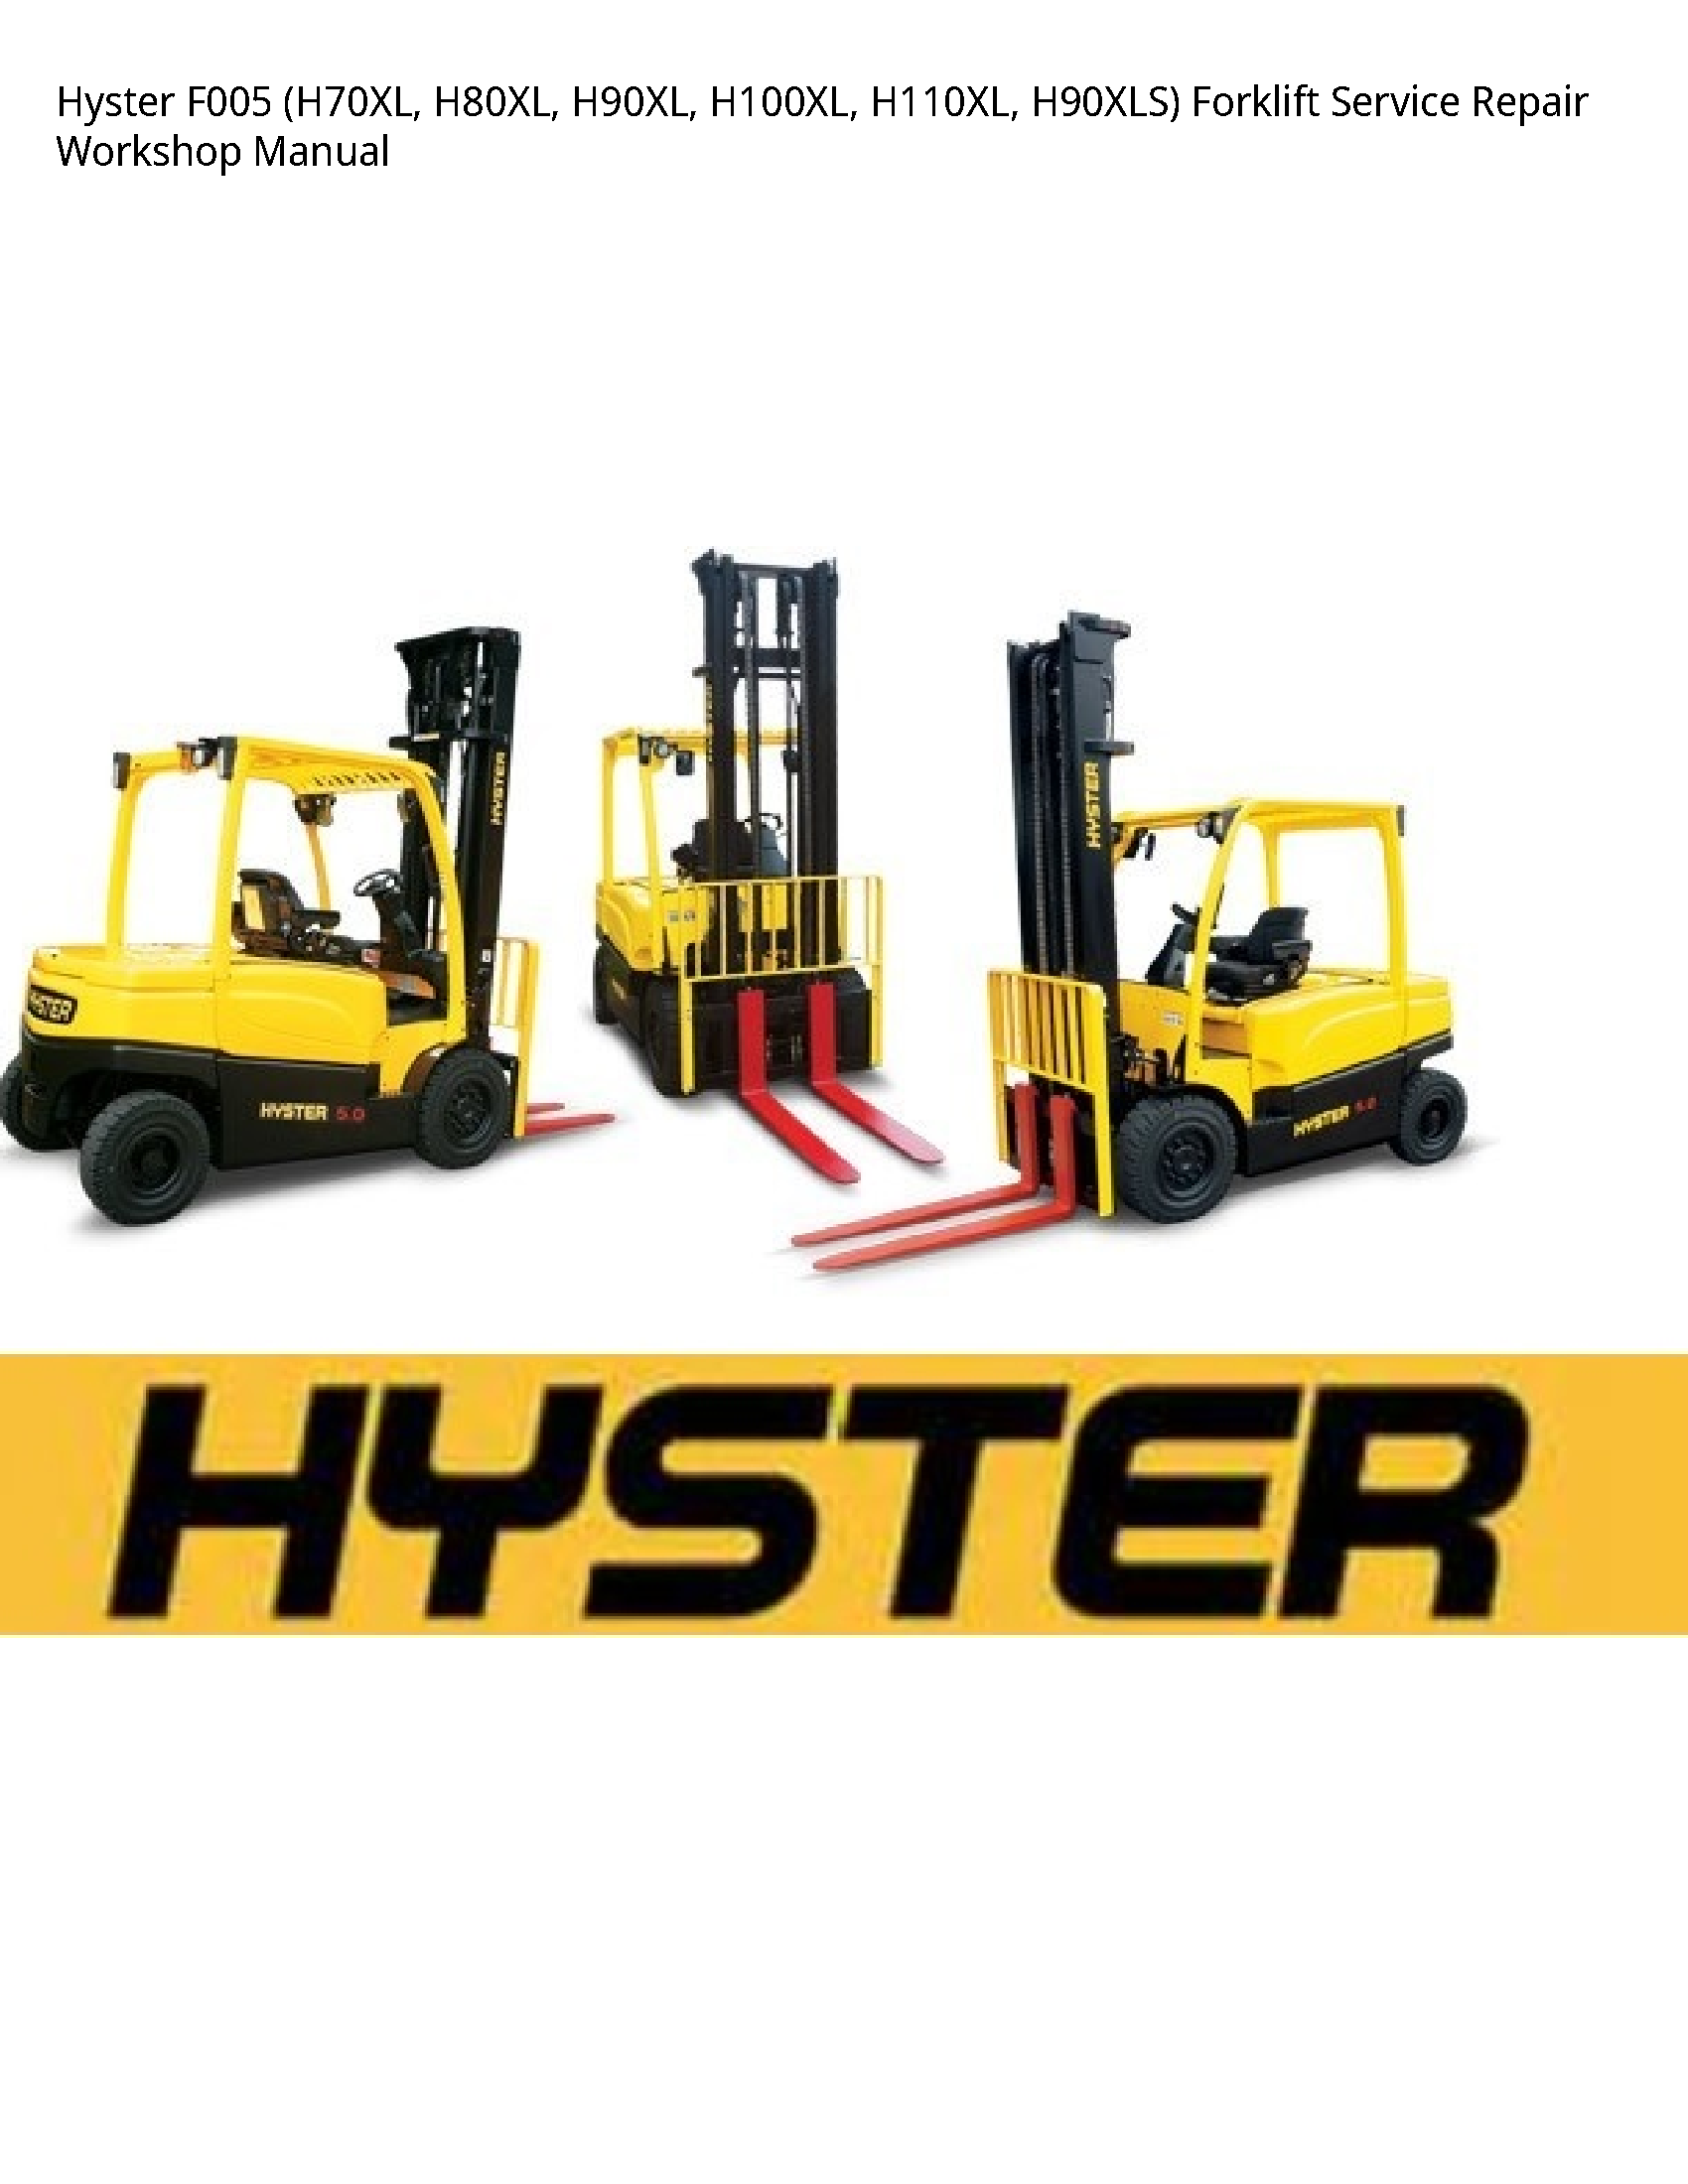 Hyster F005 Forklift manual